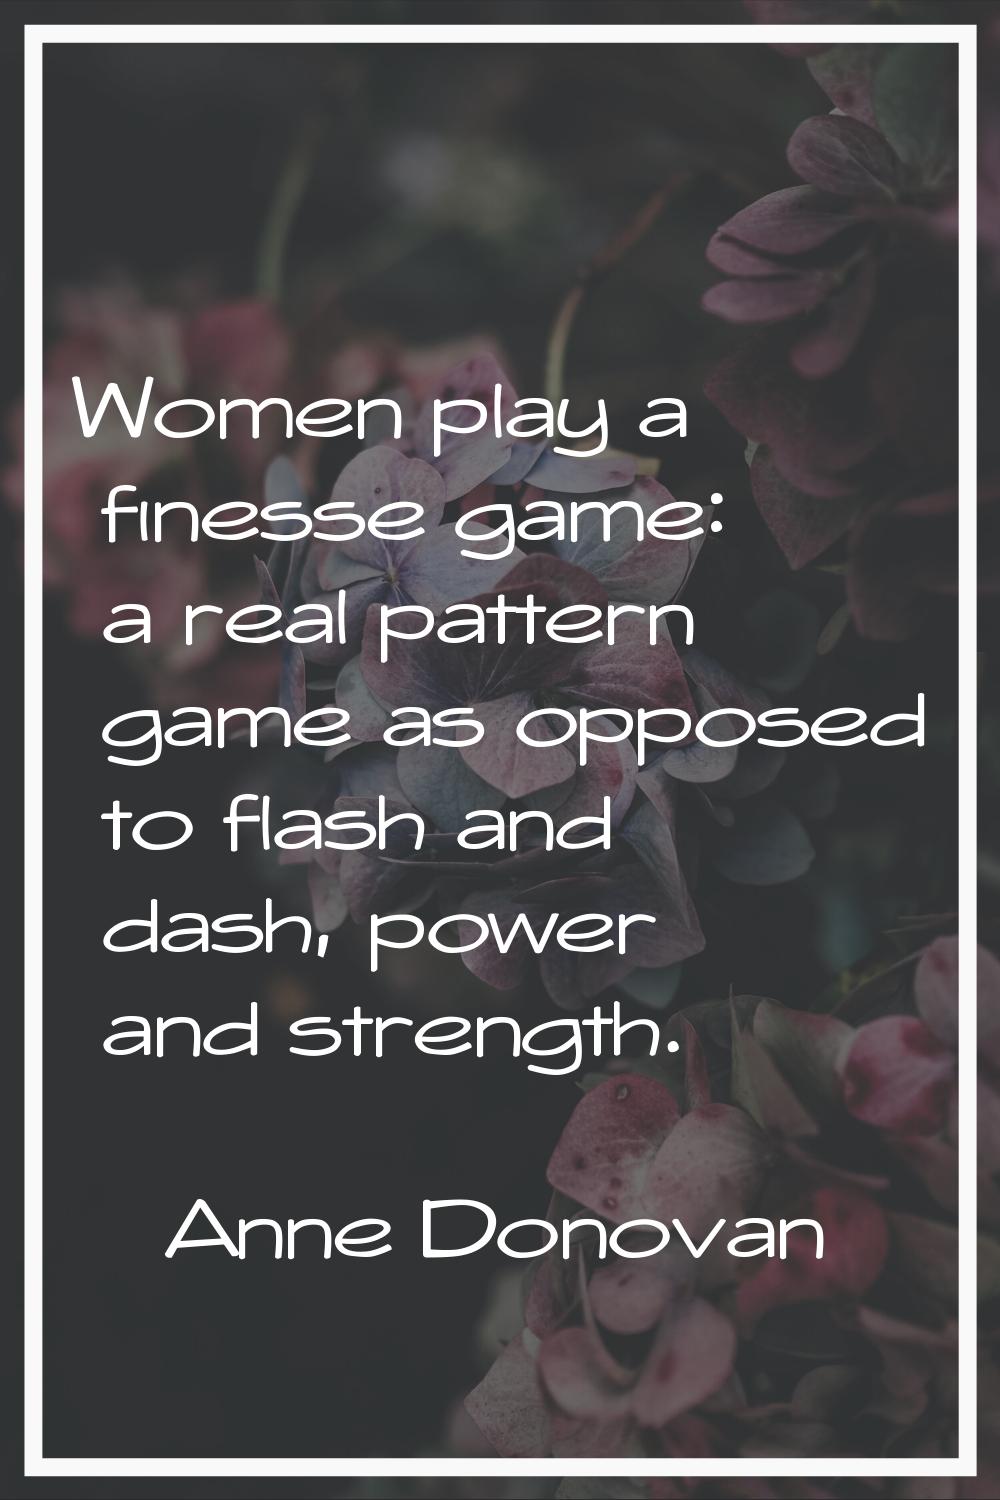 Women play a finesse game: a real pattern game as opposed to flash and dash, power and strength.